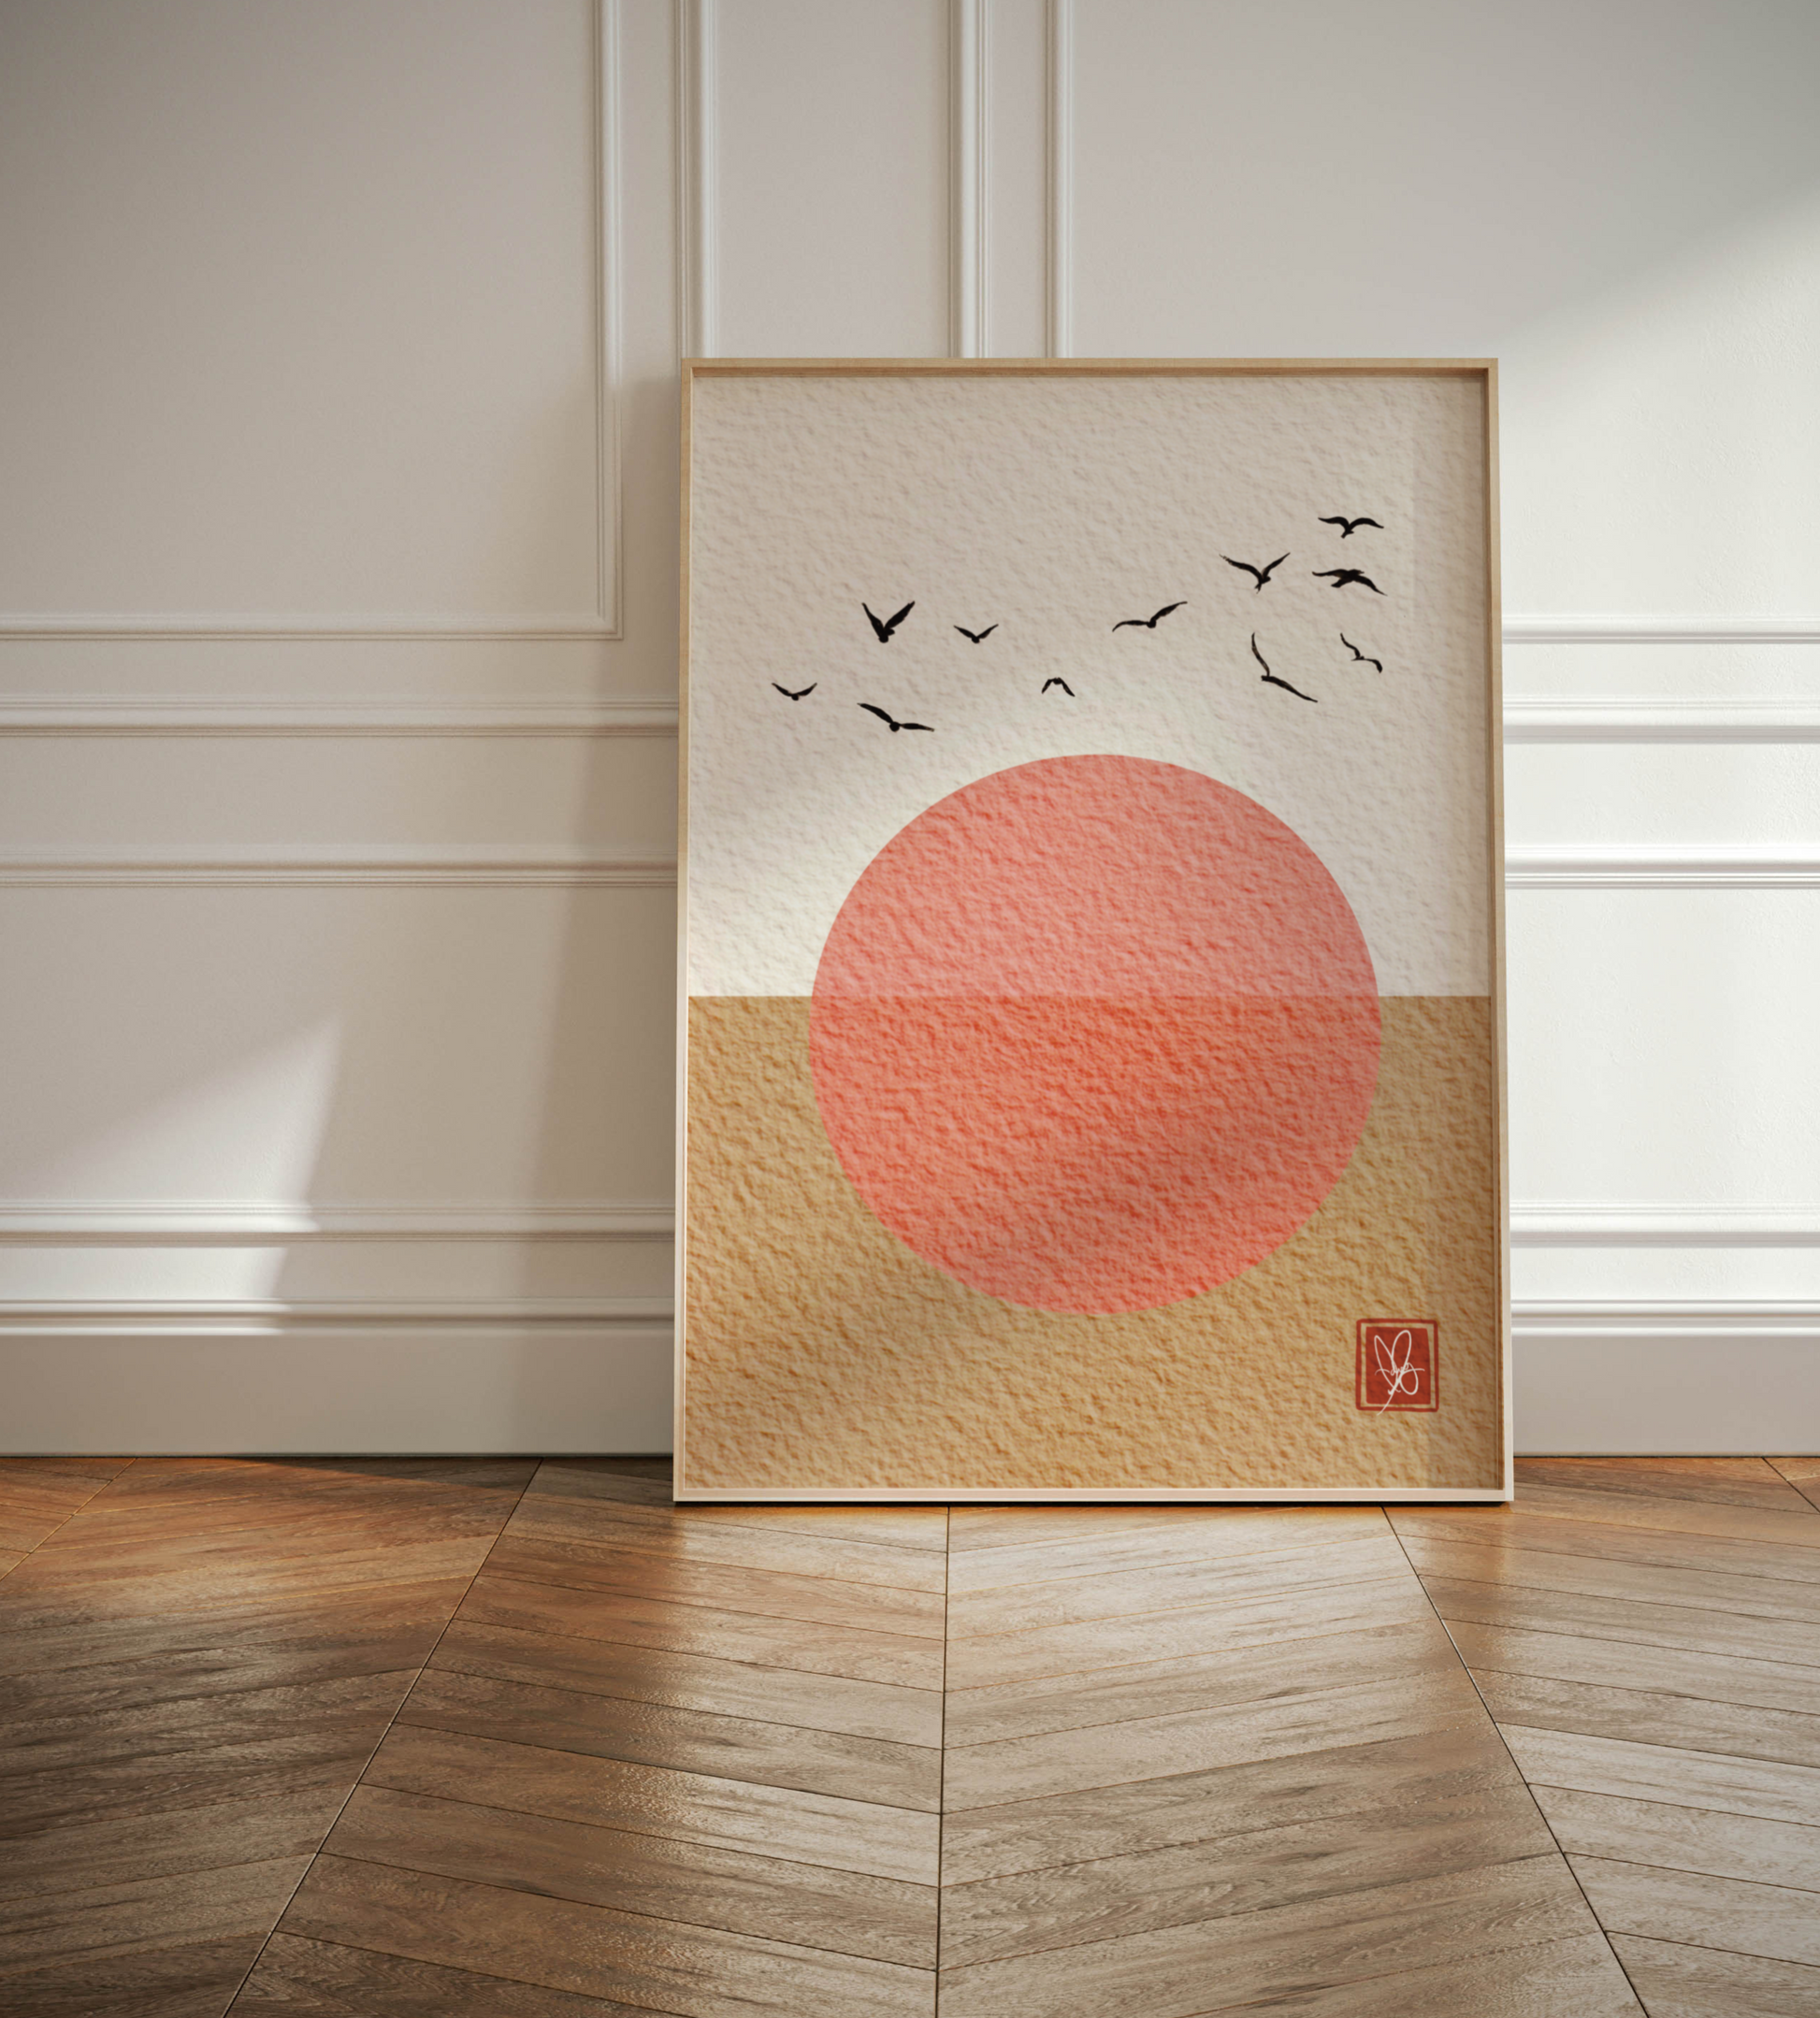 Japandi-inspired calligraphy print featuring hand-drawn birds, ideal for adding Oriental elegance to home decor. Available in various sizes. Shop now for serene wall art.